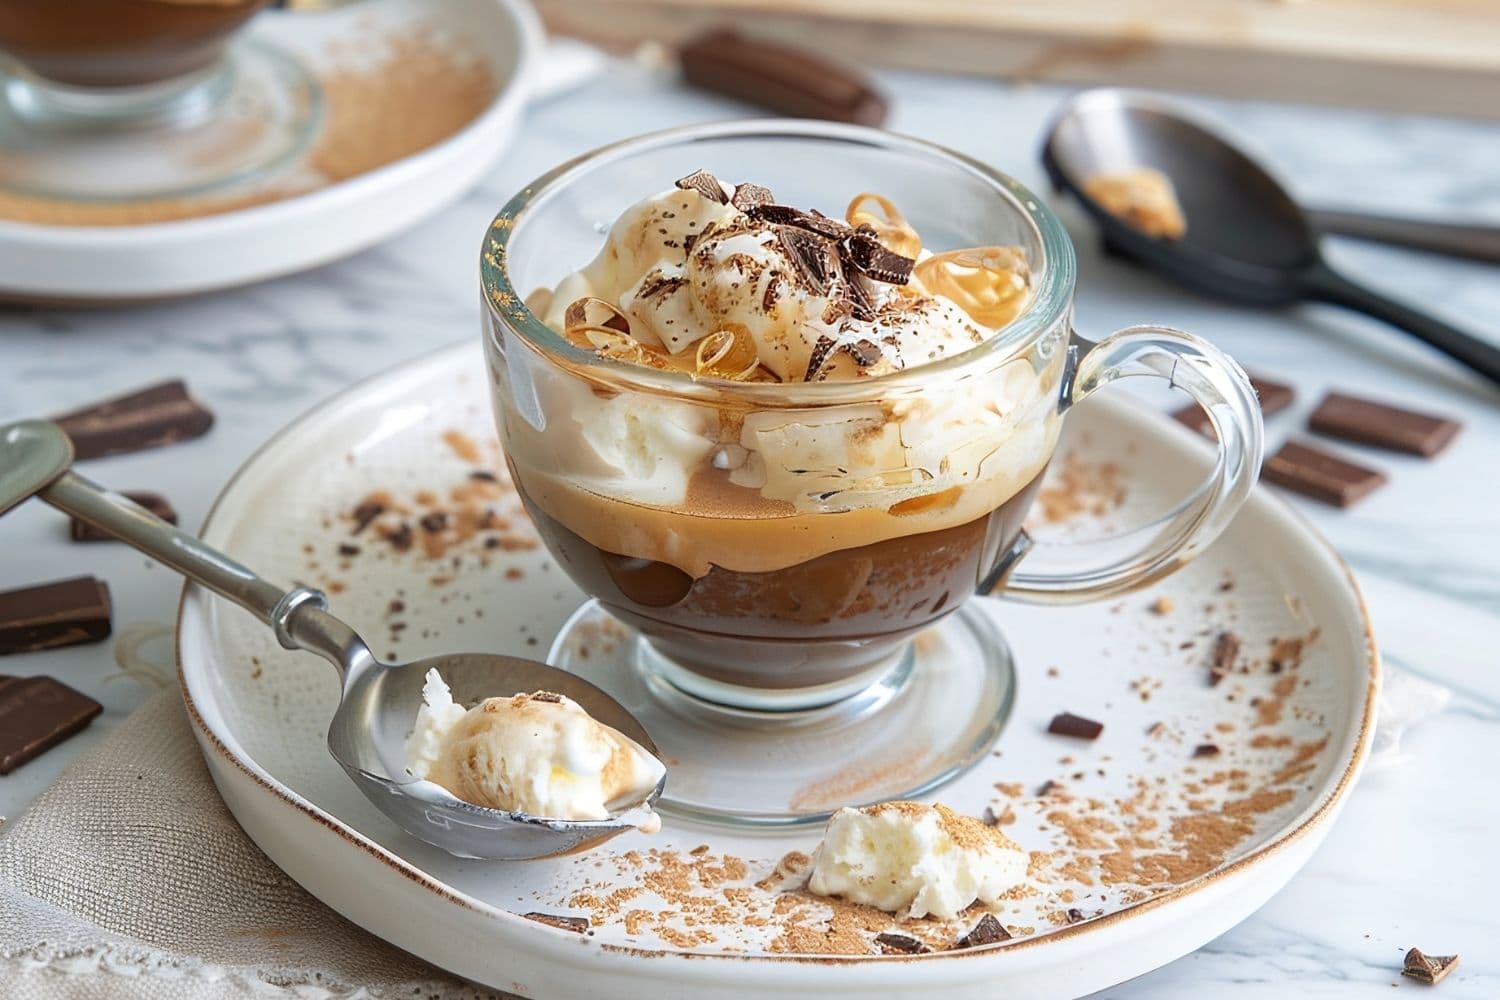 Affogato in a Glass Mug on a White Plate with a Spoon and a Dusting of Cocoa